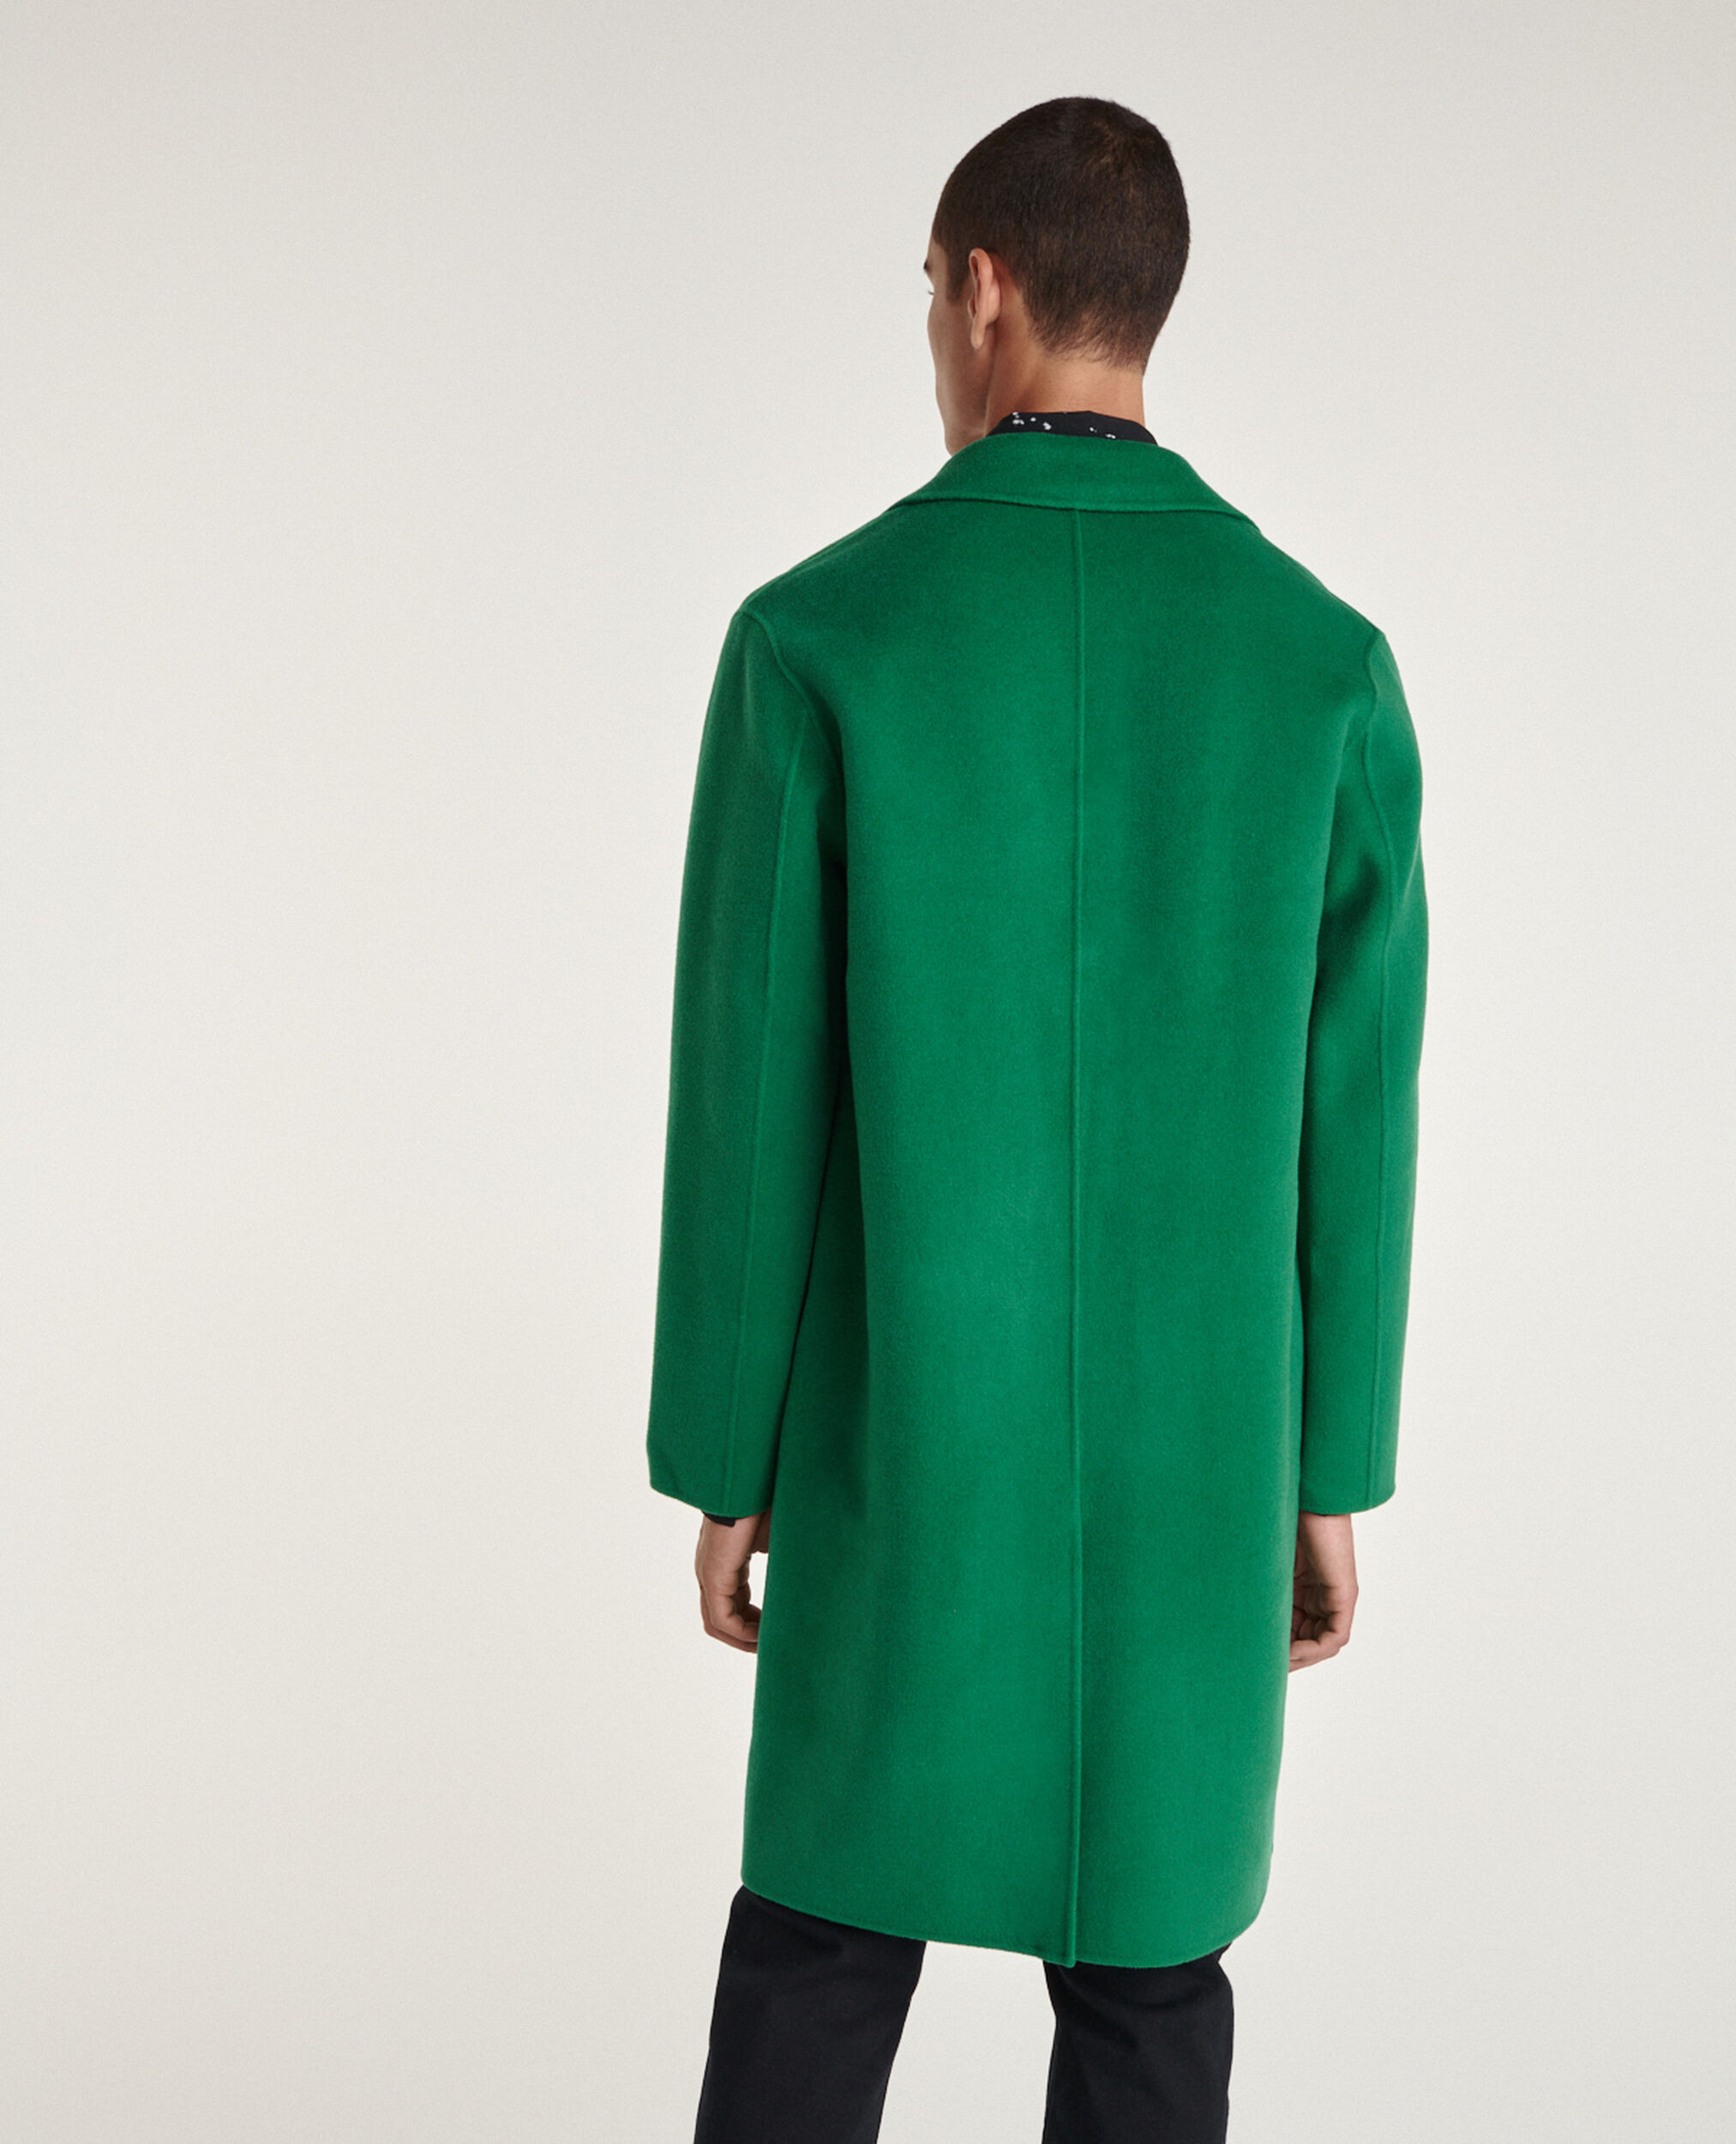 Manteau laine vert bouteille ample, GREEN, hi-res image number null